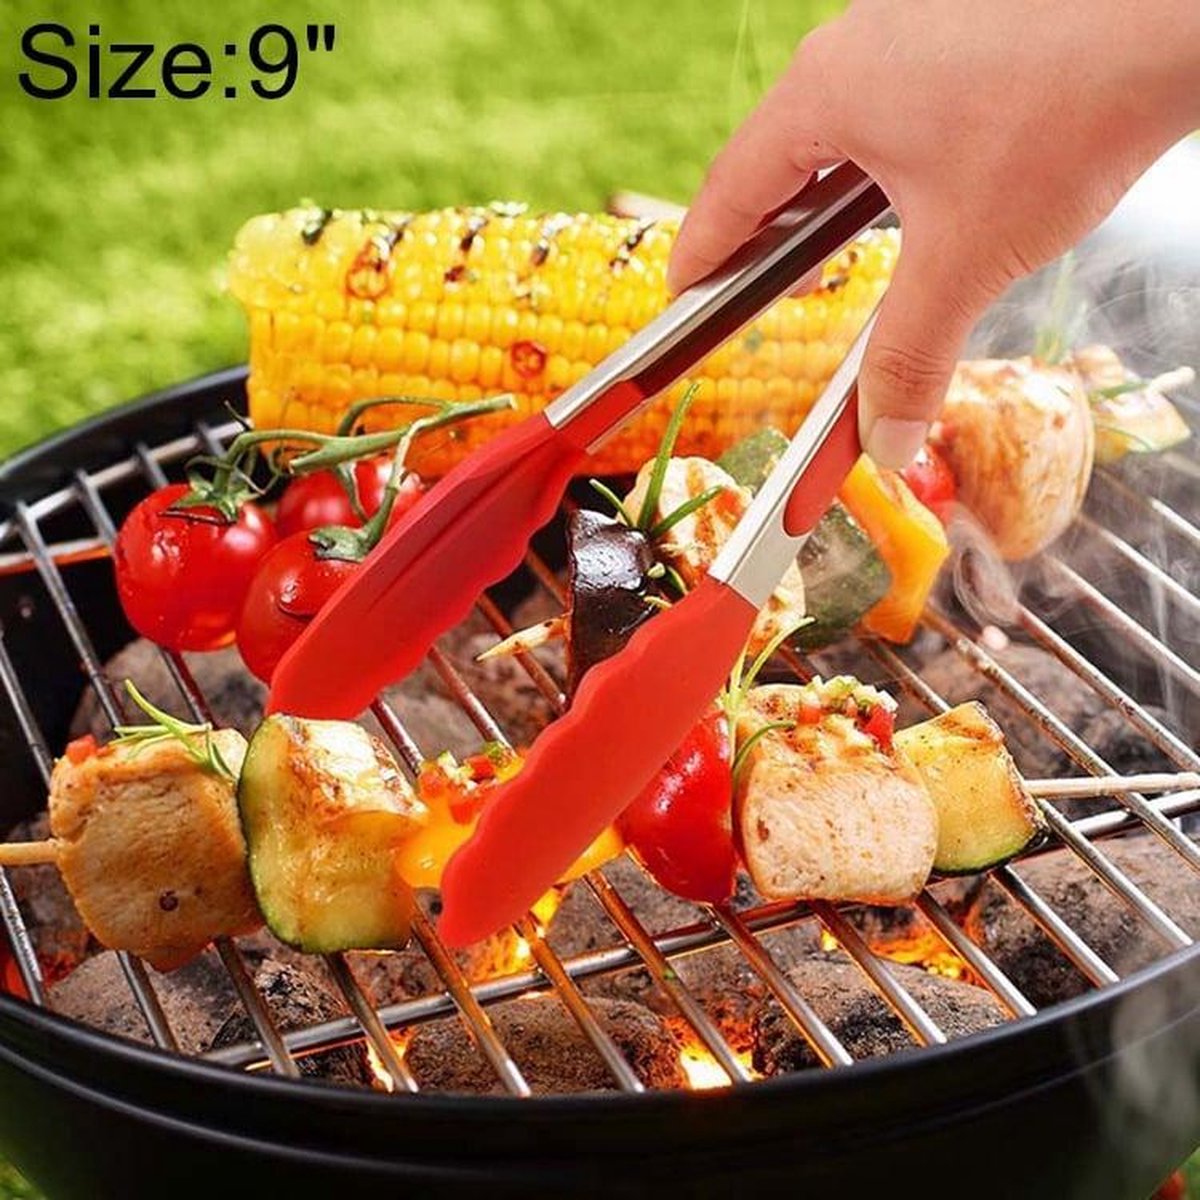 9 inch siliconen antislip voedsel brood barbecue BBQ clip tang keukengereedschap (rood)